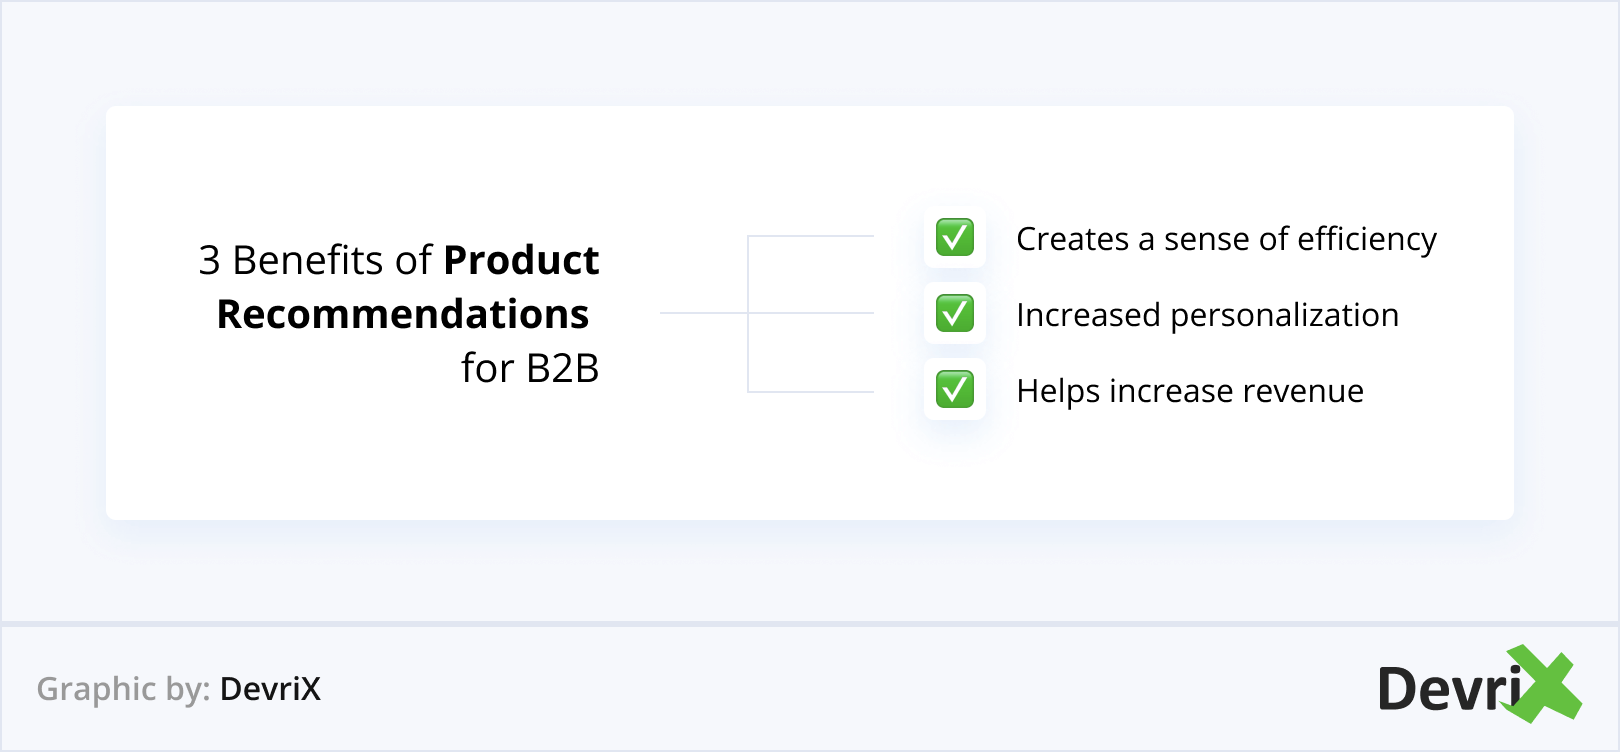 3 Benefits of Product Recommendations for B2B